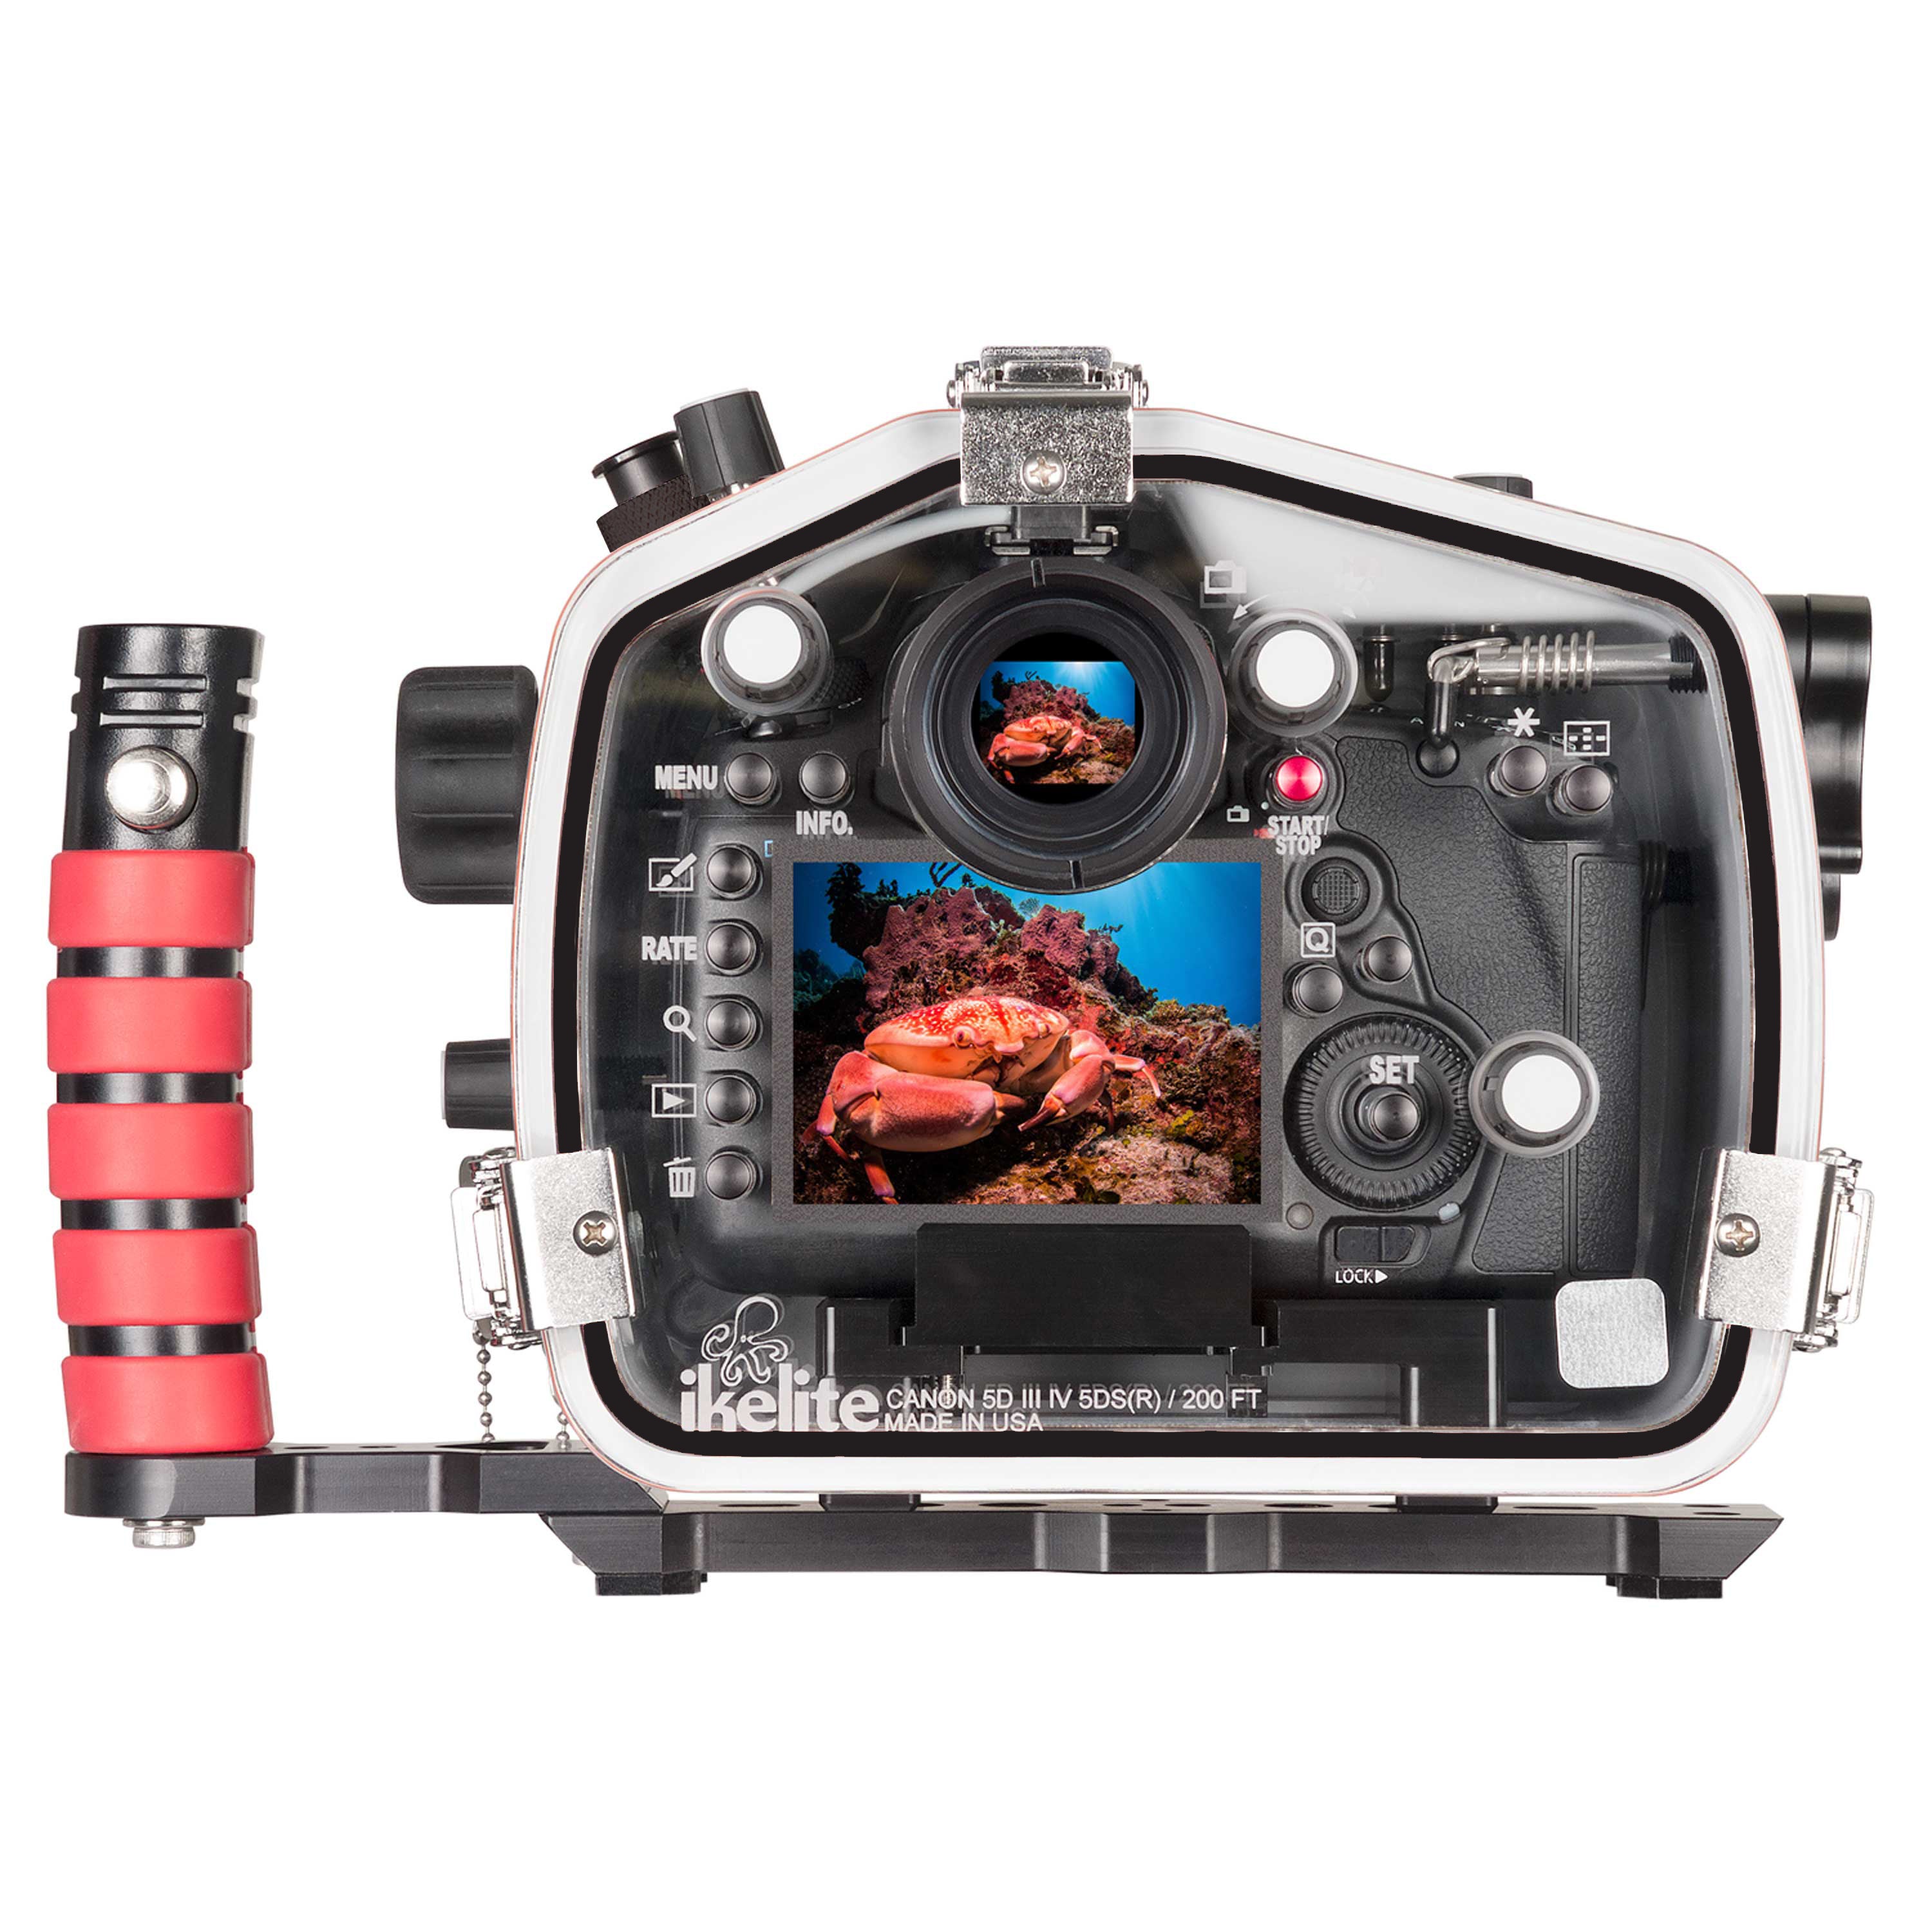 200DL Underwater Housing for Canon EOS 5D Mark III, 5D Mark IV, 5DS, 5